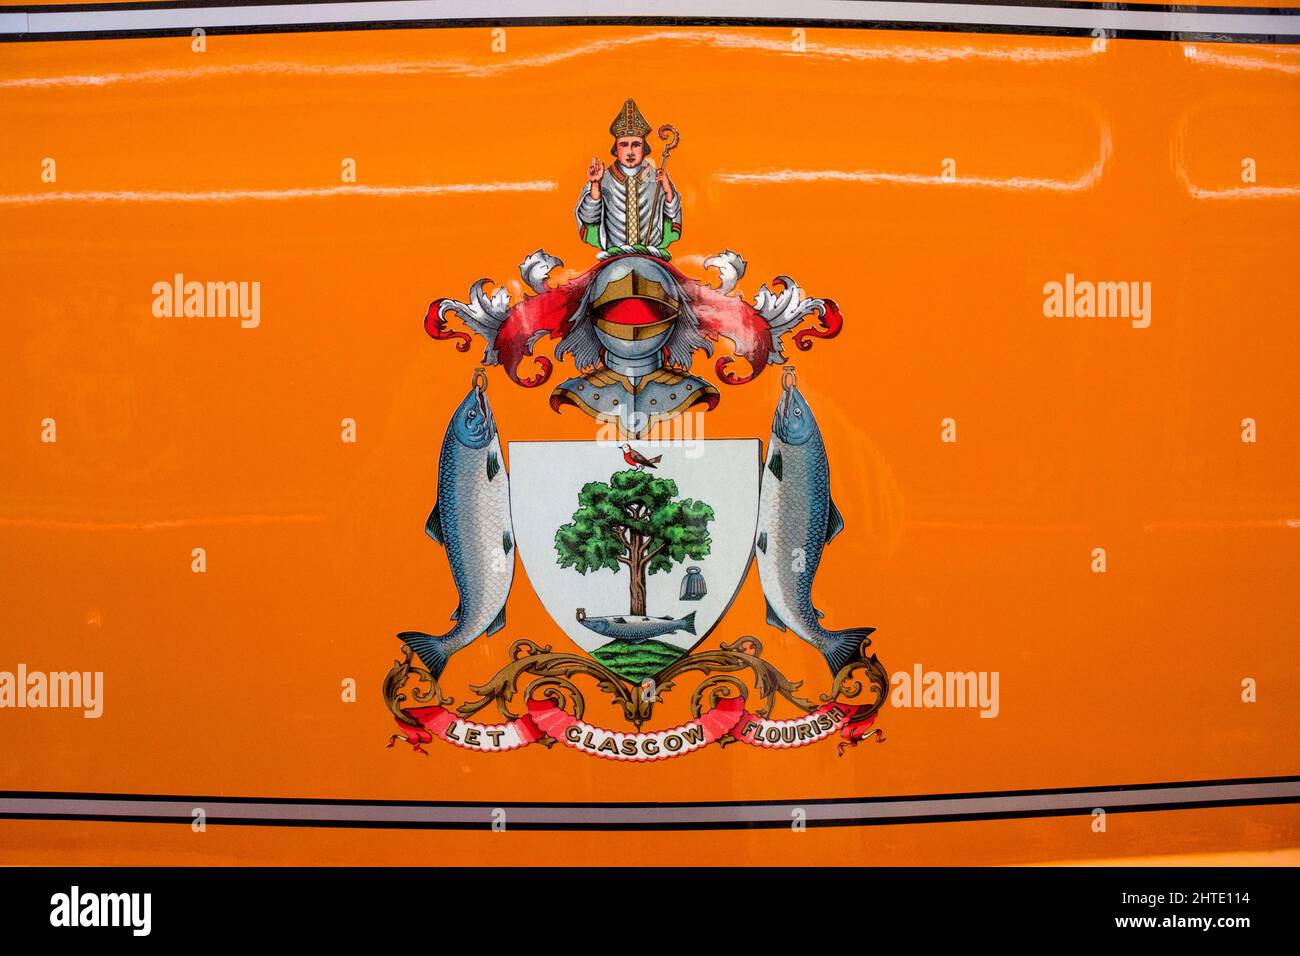 Derbyshire, UK – 5 April 2018: Let Glasgow Flourish insignia with knight, fish and tree of life on the orange paintwork of a restored tram at Crich Tr Stock Photo